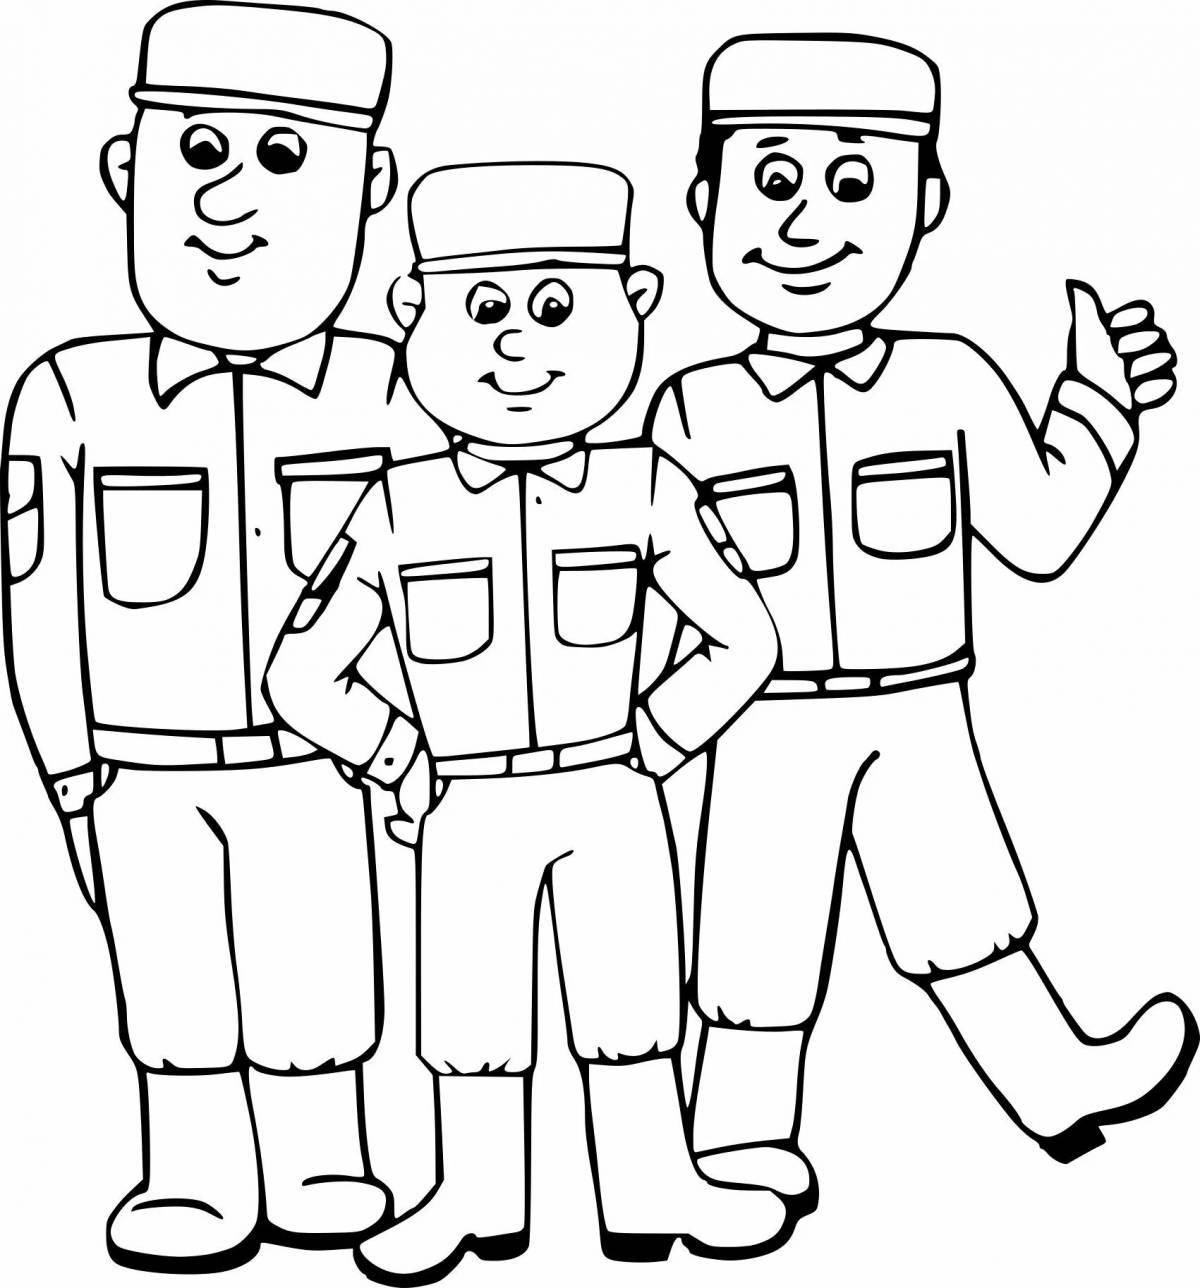 Coloring page glorious military uniform